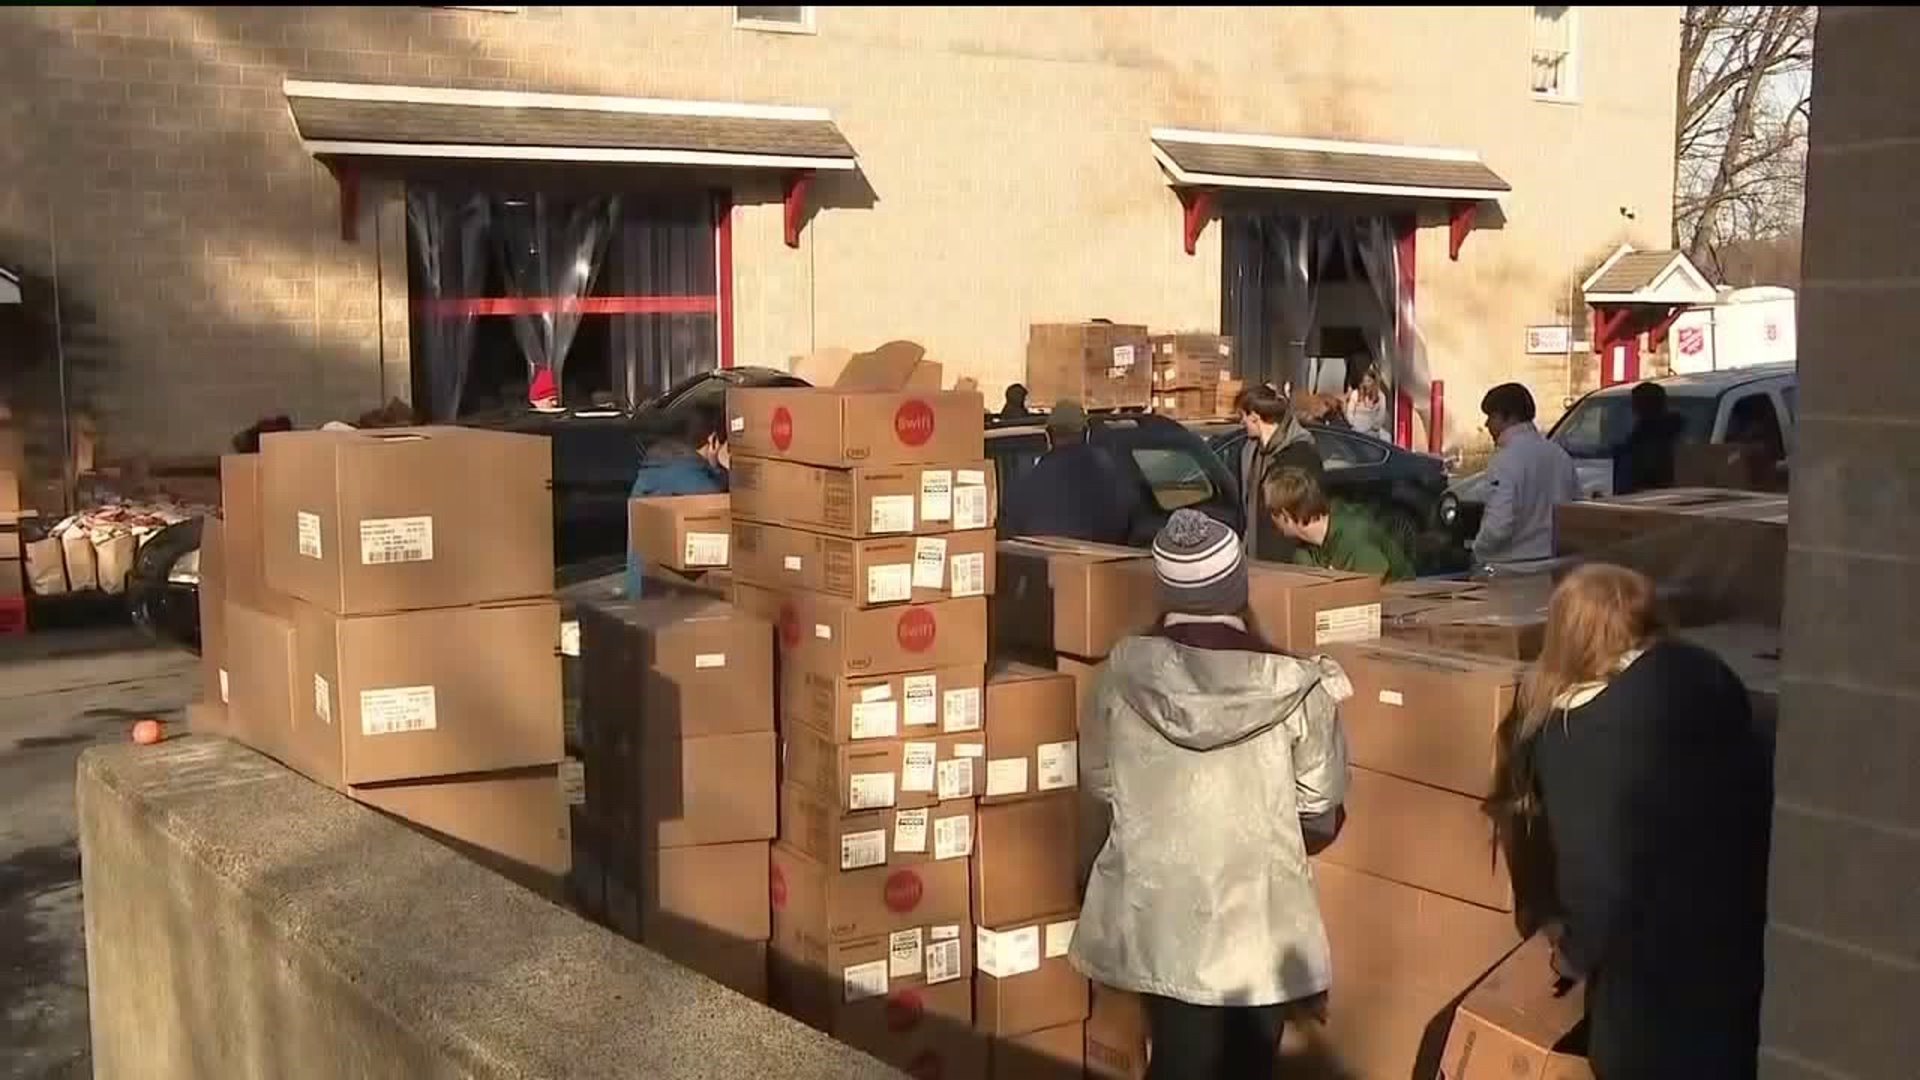 Salvation Army Gives Christmas Dinners to Those in Need